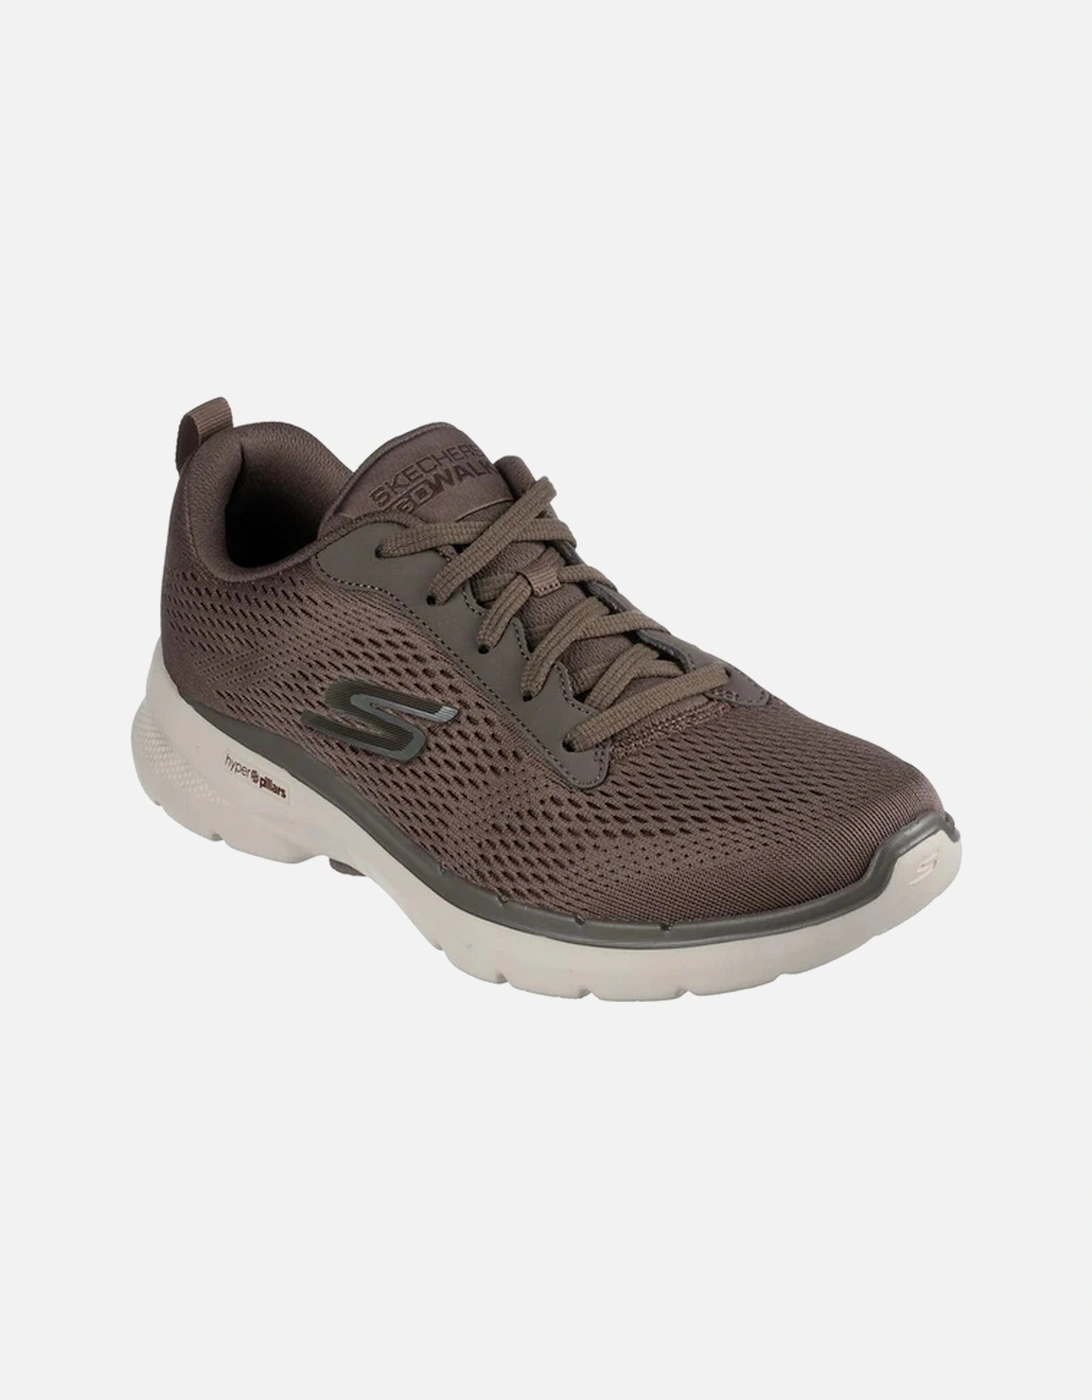 Skechers Mens Go Walk 6 Avalo Trainers, 6 of 5